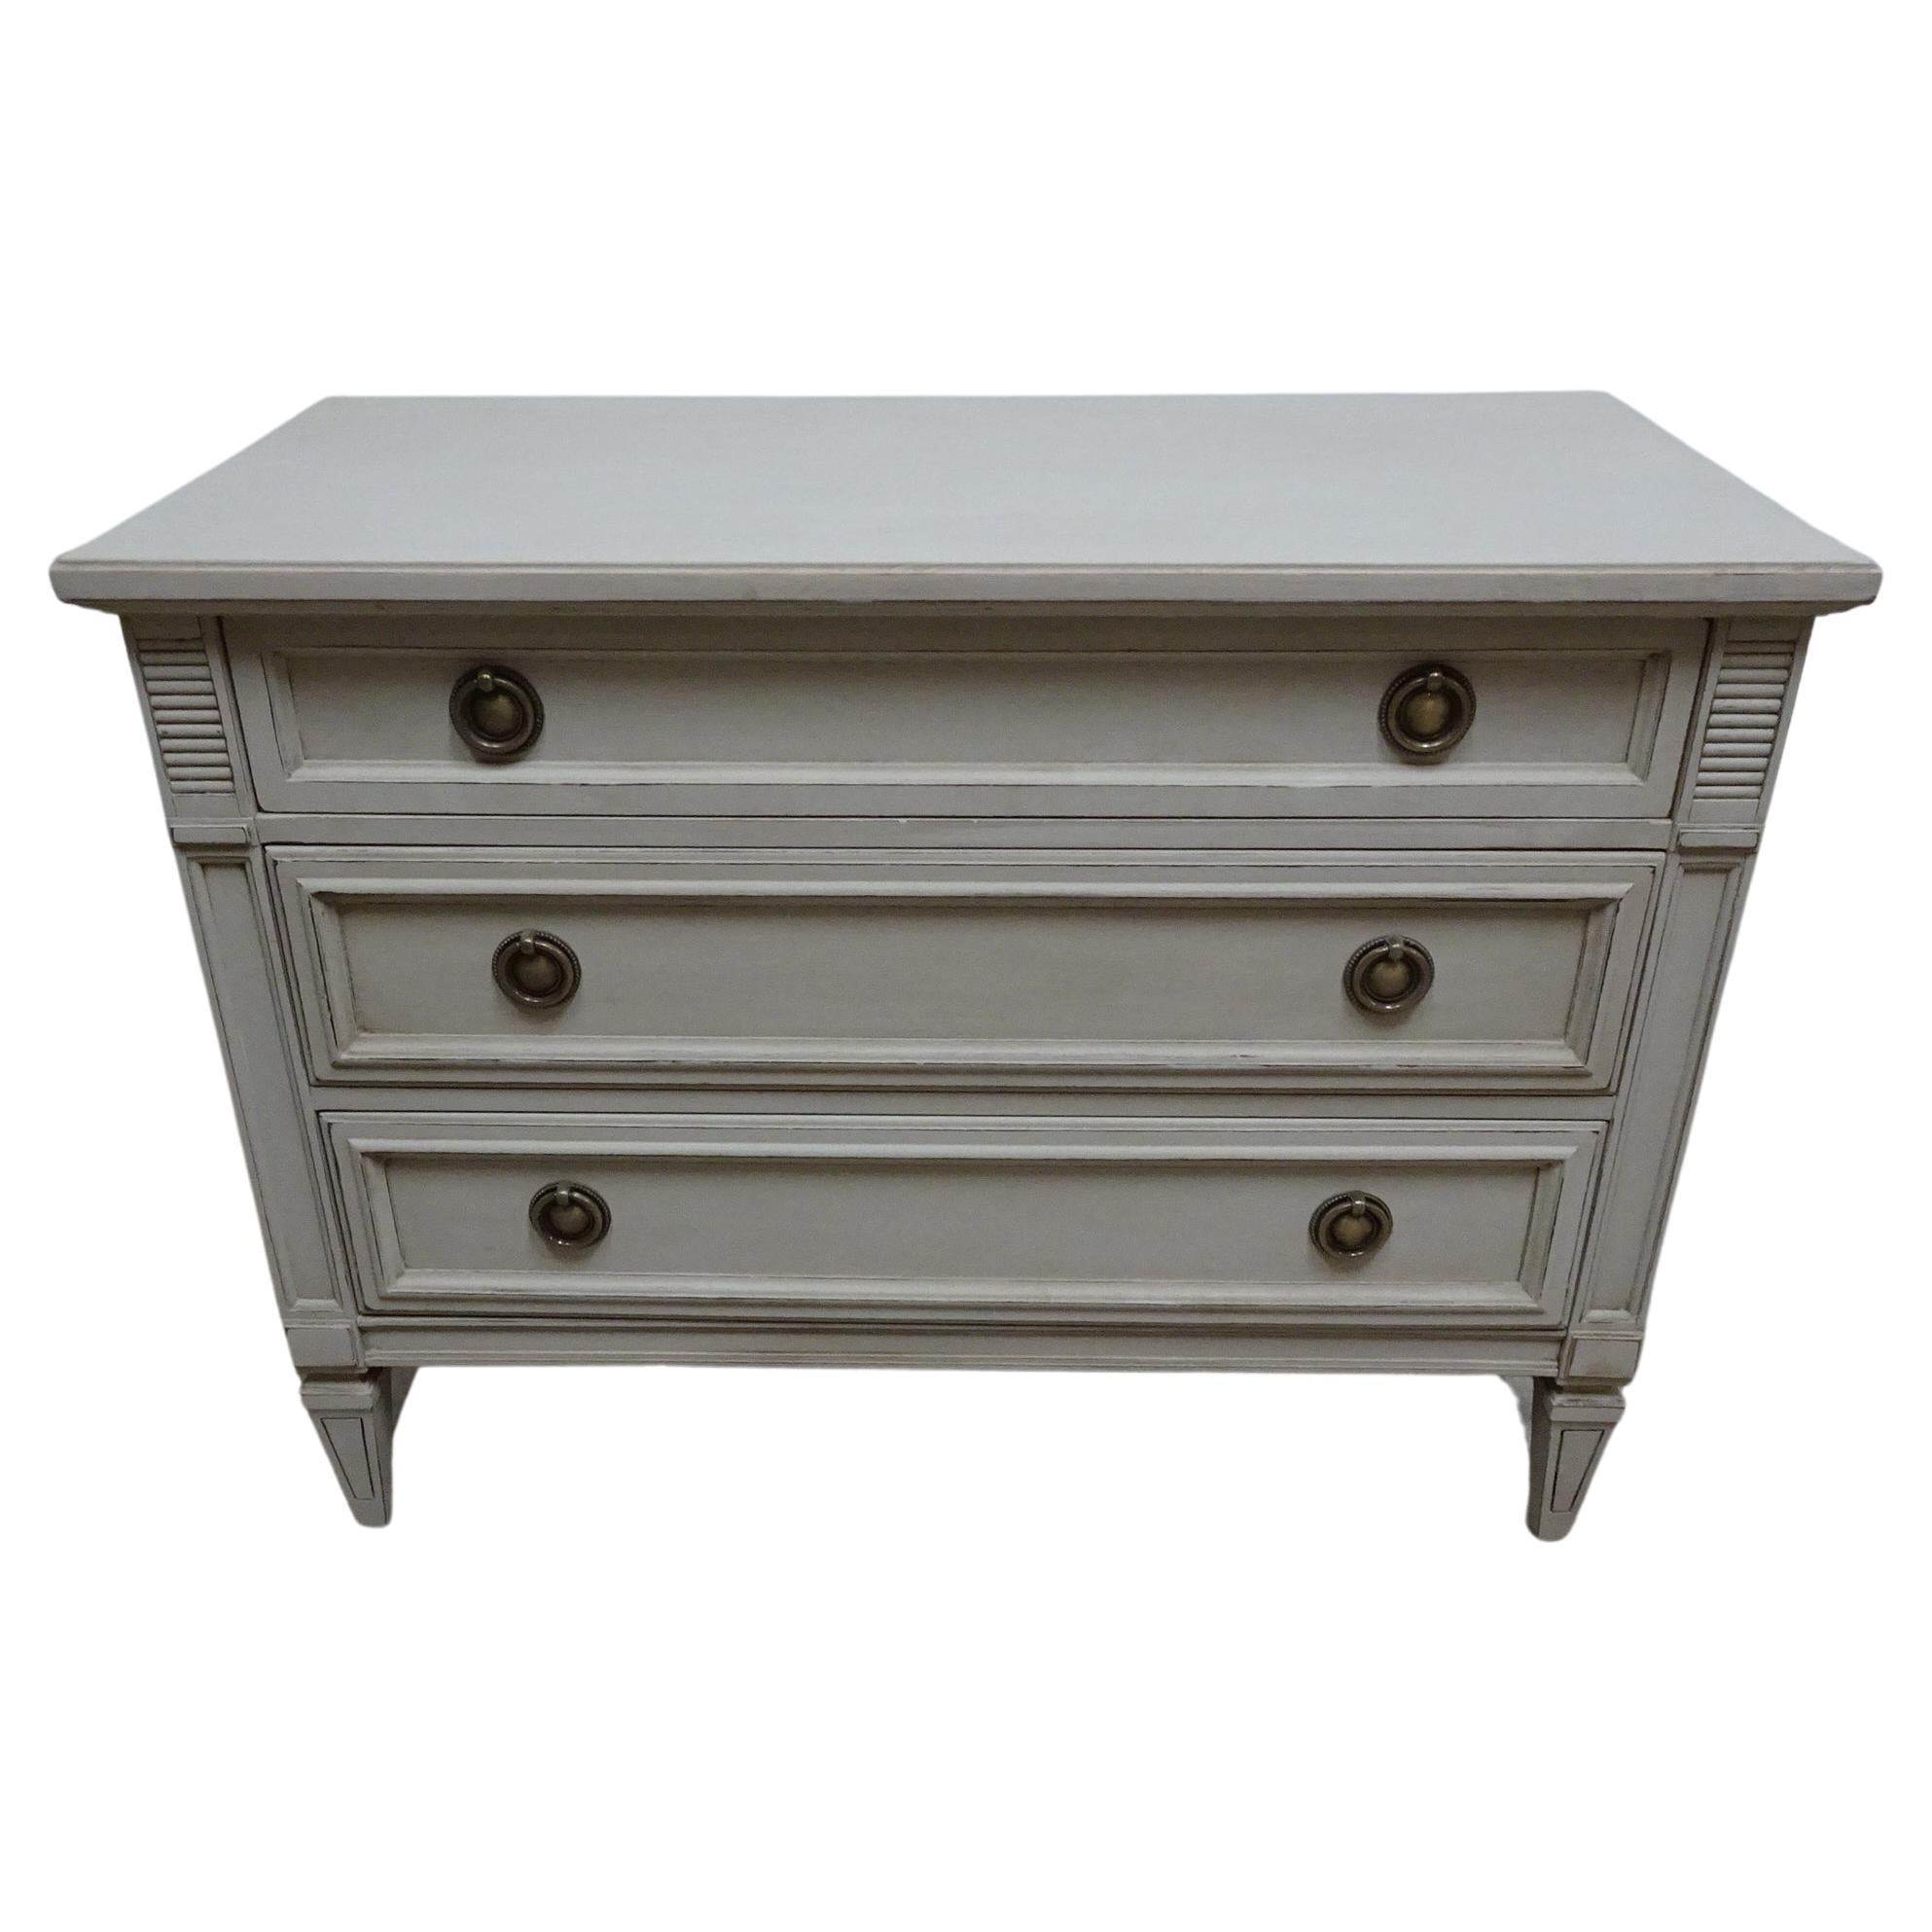   Unique Gustavian Style 3 Drawer Chest Of Drawers For Sale